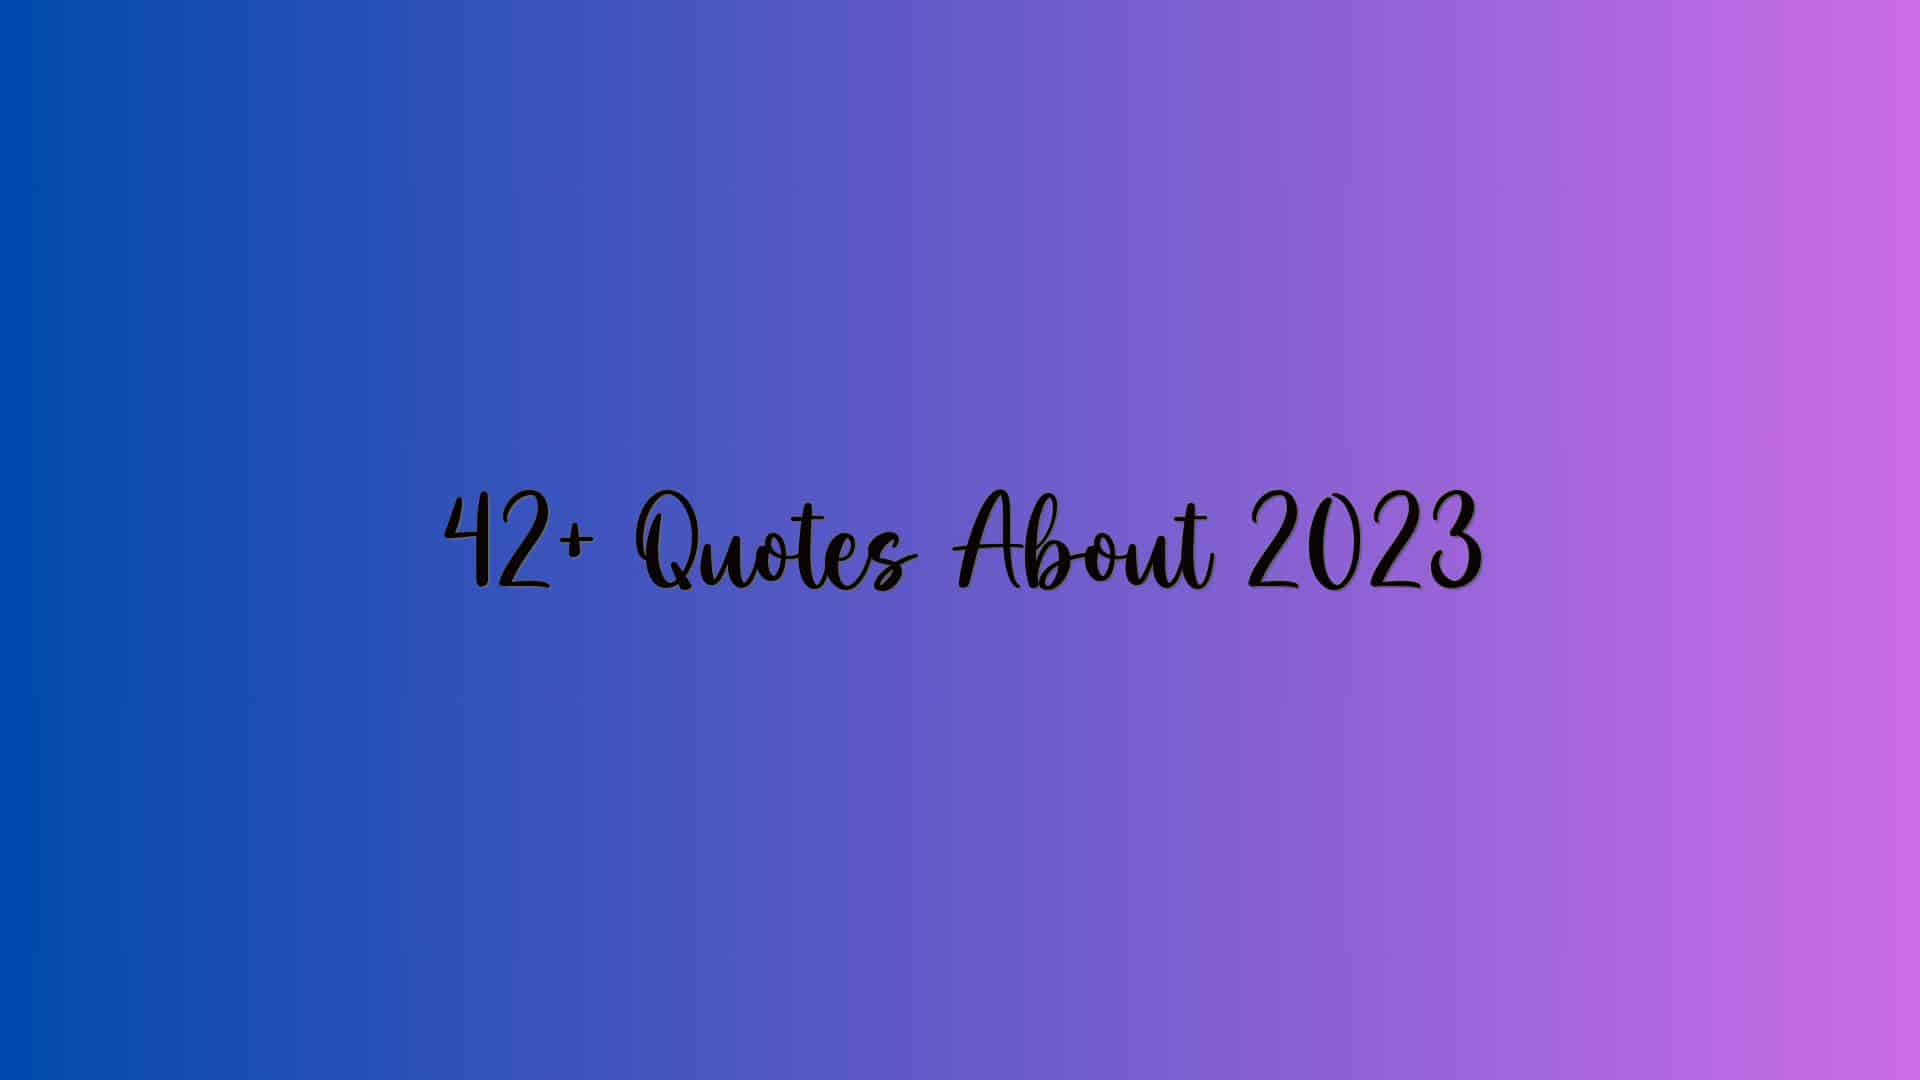 42+ Quotes About 2023